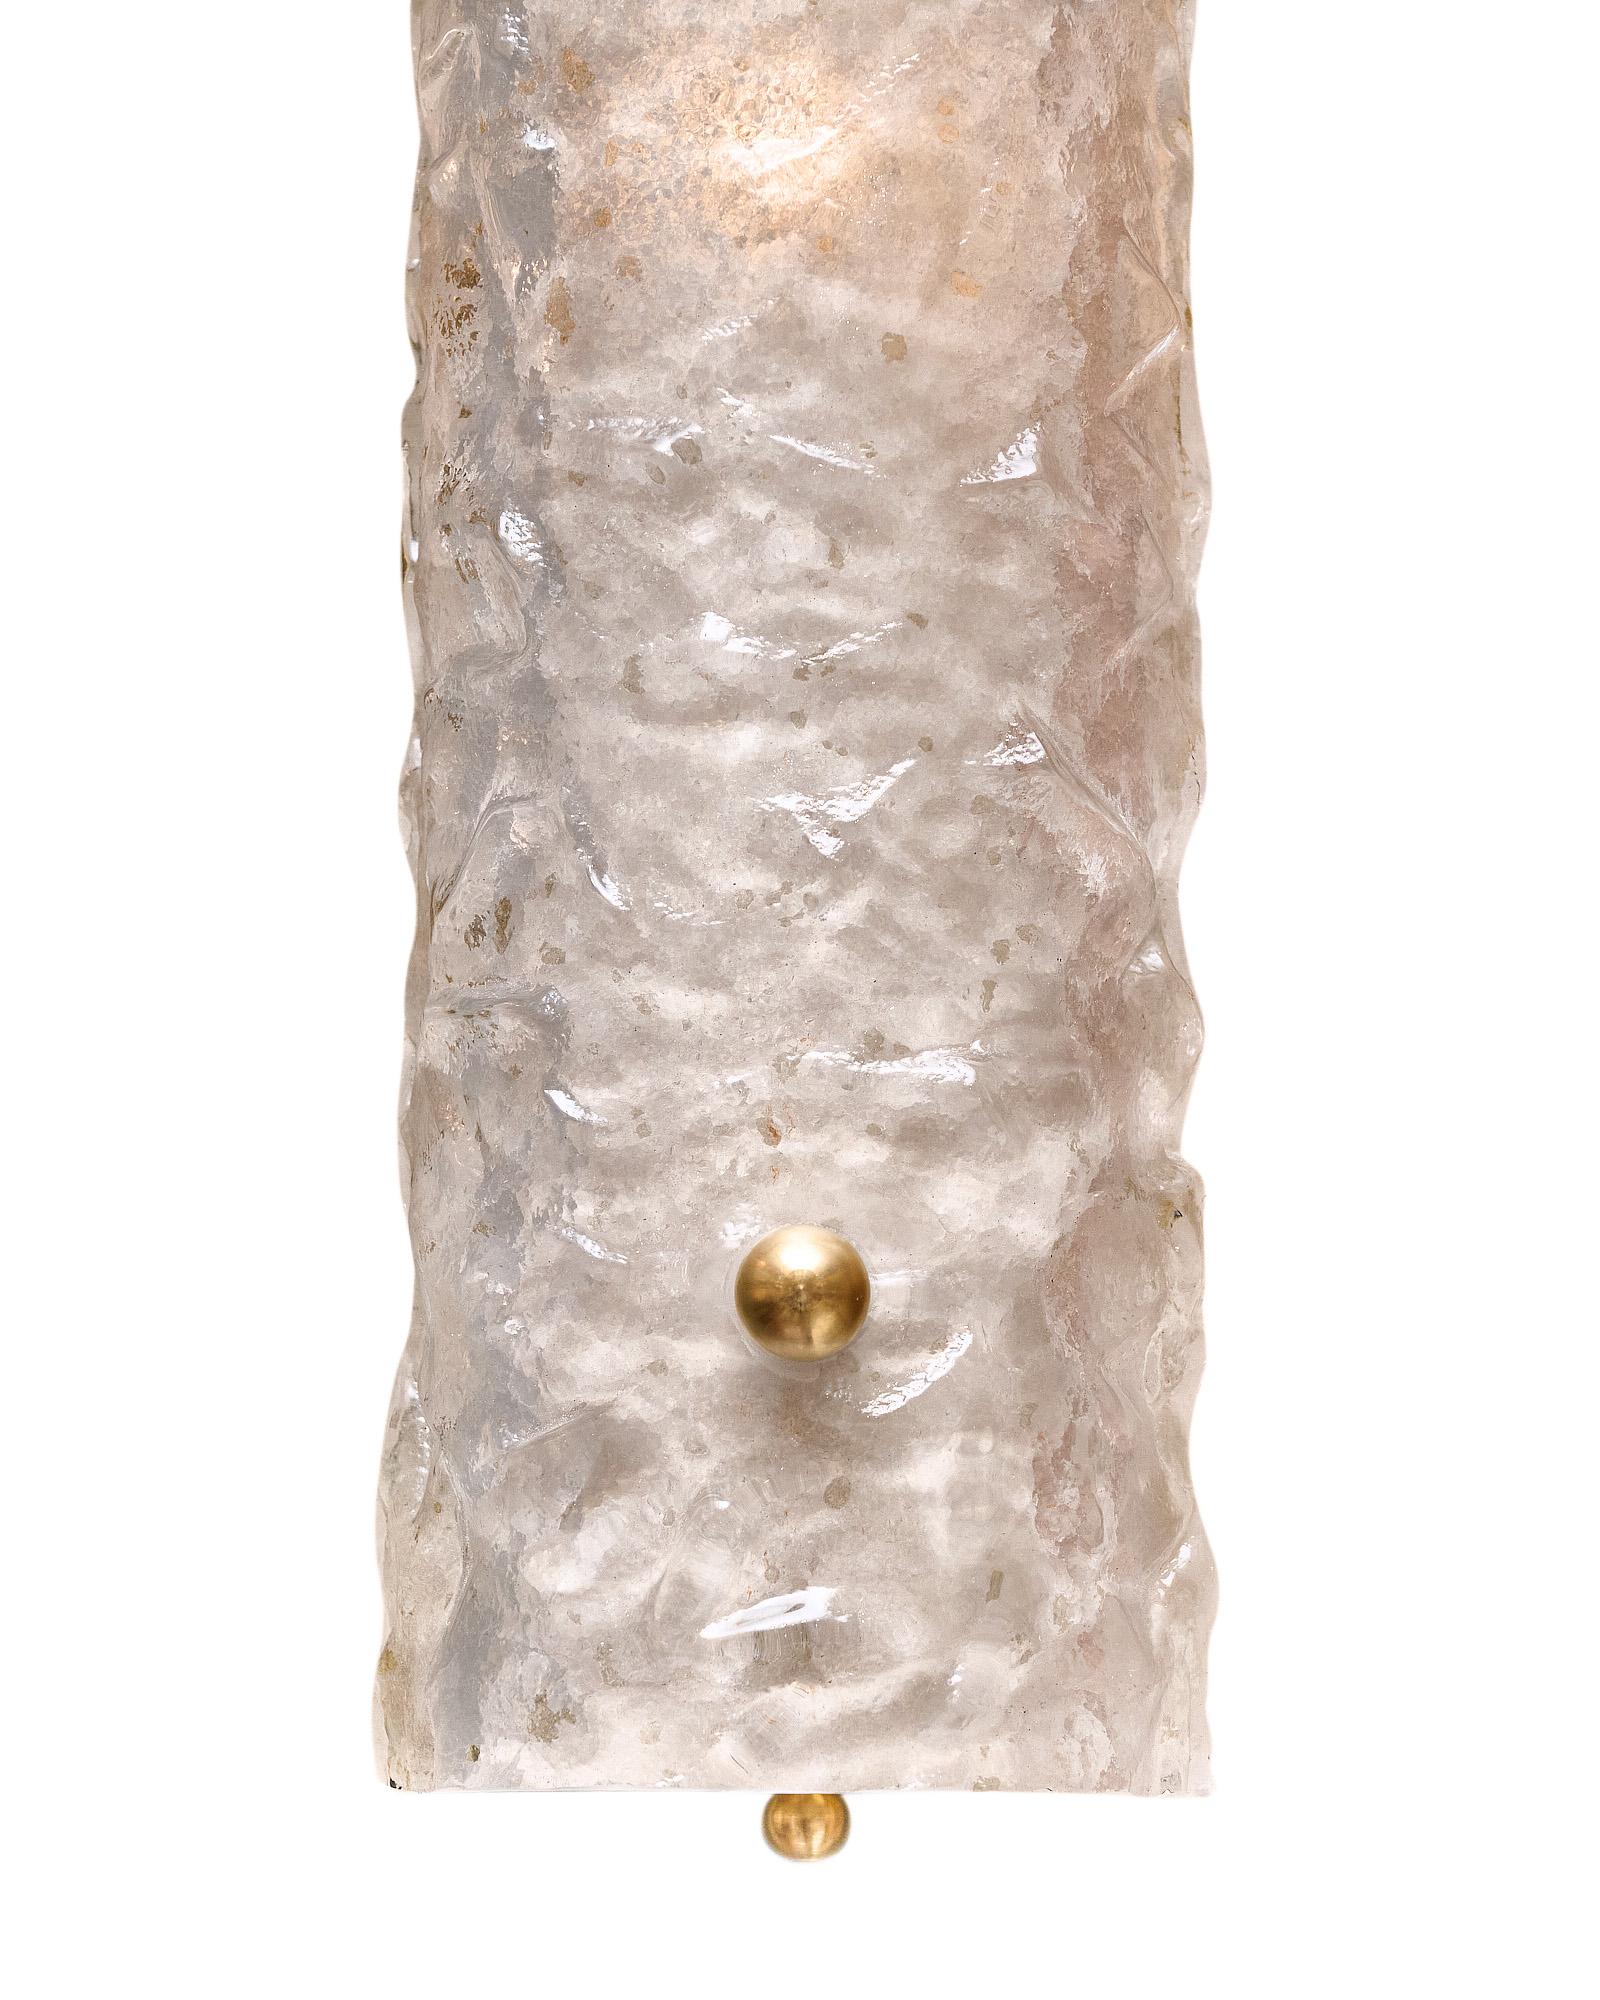 Pair of sconces made of hand-blown glass with a textured stampato finish. The glass is in a pearlescent color and is held in place by brass finials. They have been newly wired to fit US standards.